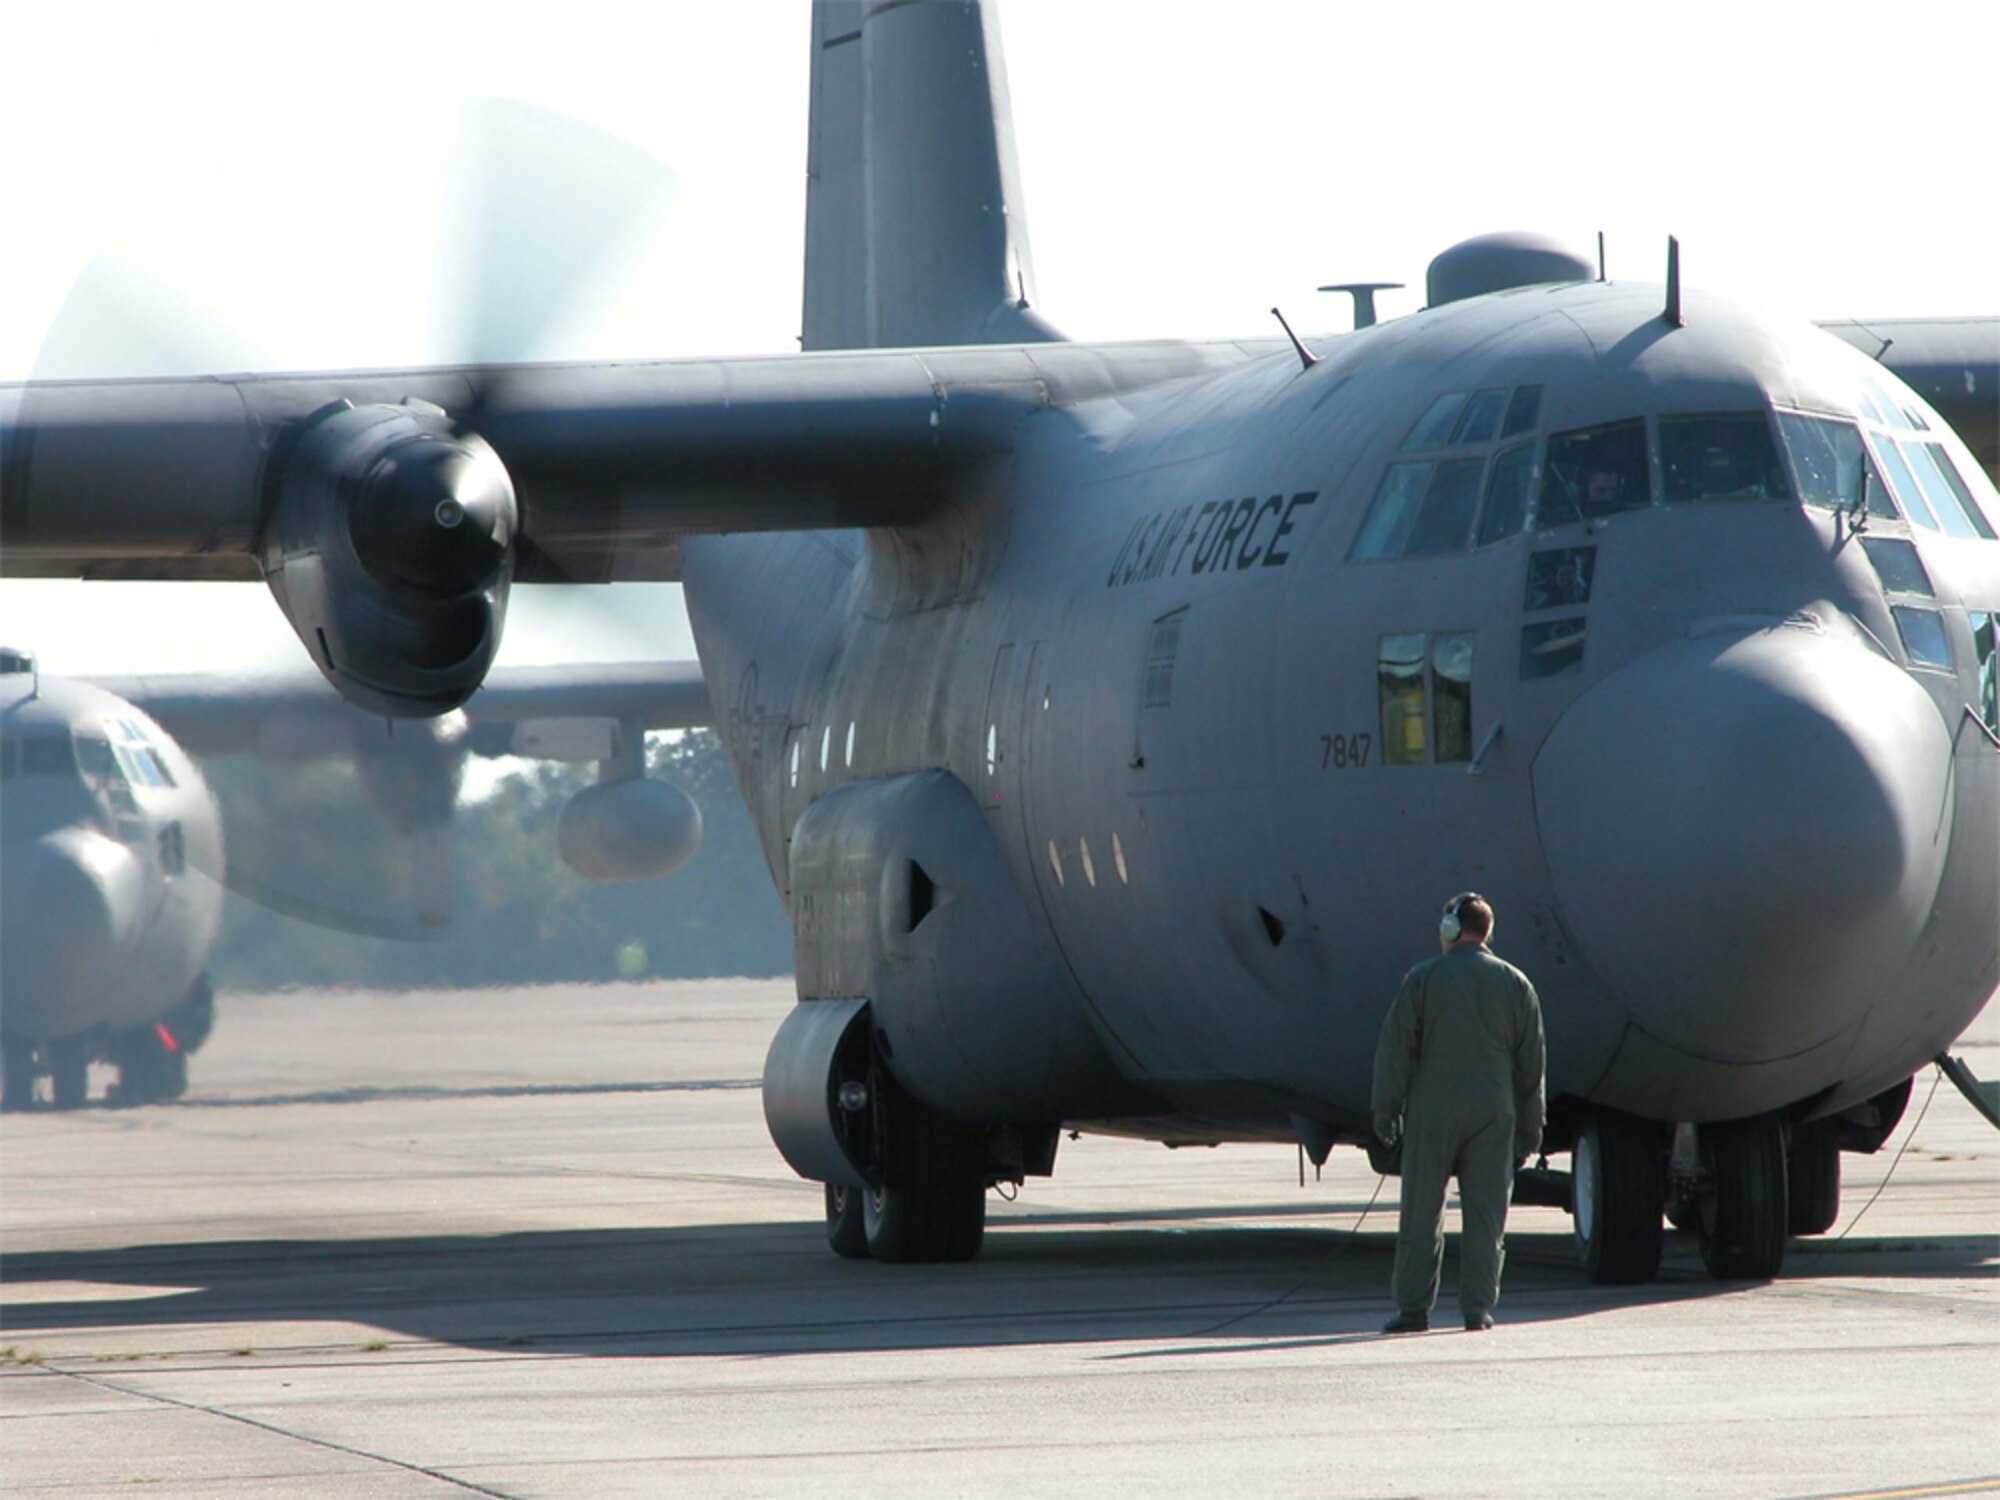 An Arkansas Air National Guard C-130 prepares to taxi for a training flight in this file photo. (U.S. Air Force photo)